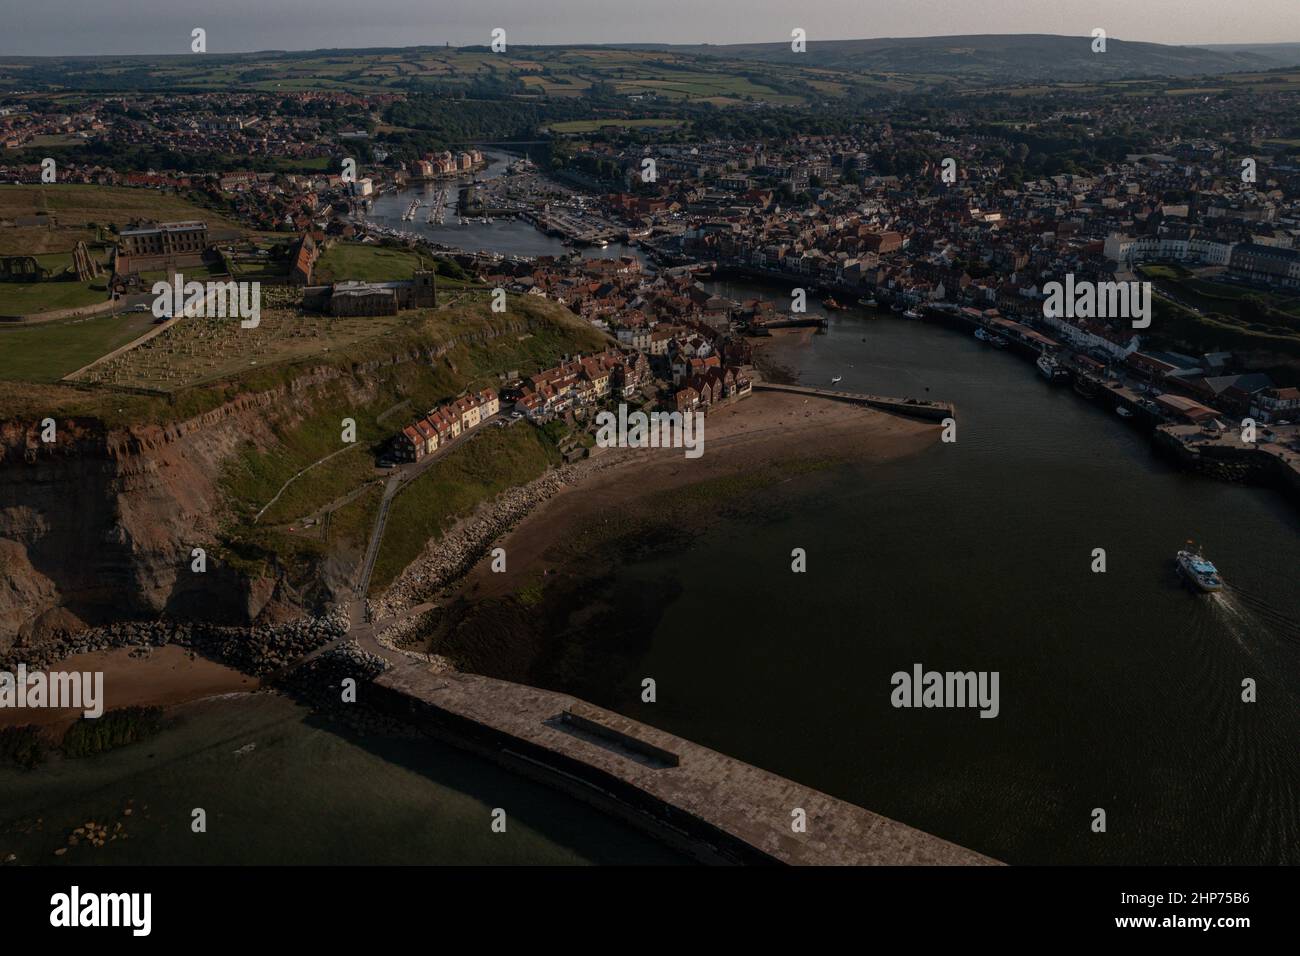 Scarborough , Whitby, Robin Hoods Bay From The Air, Aerial Landscape Drone Photography Stock Photo